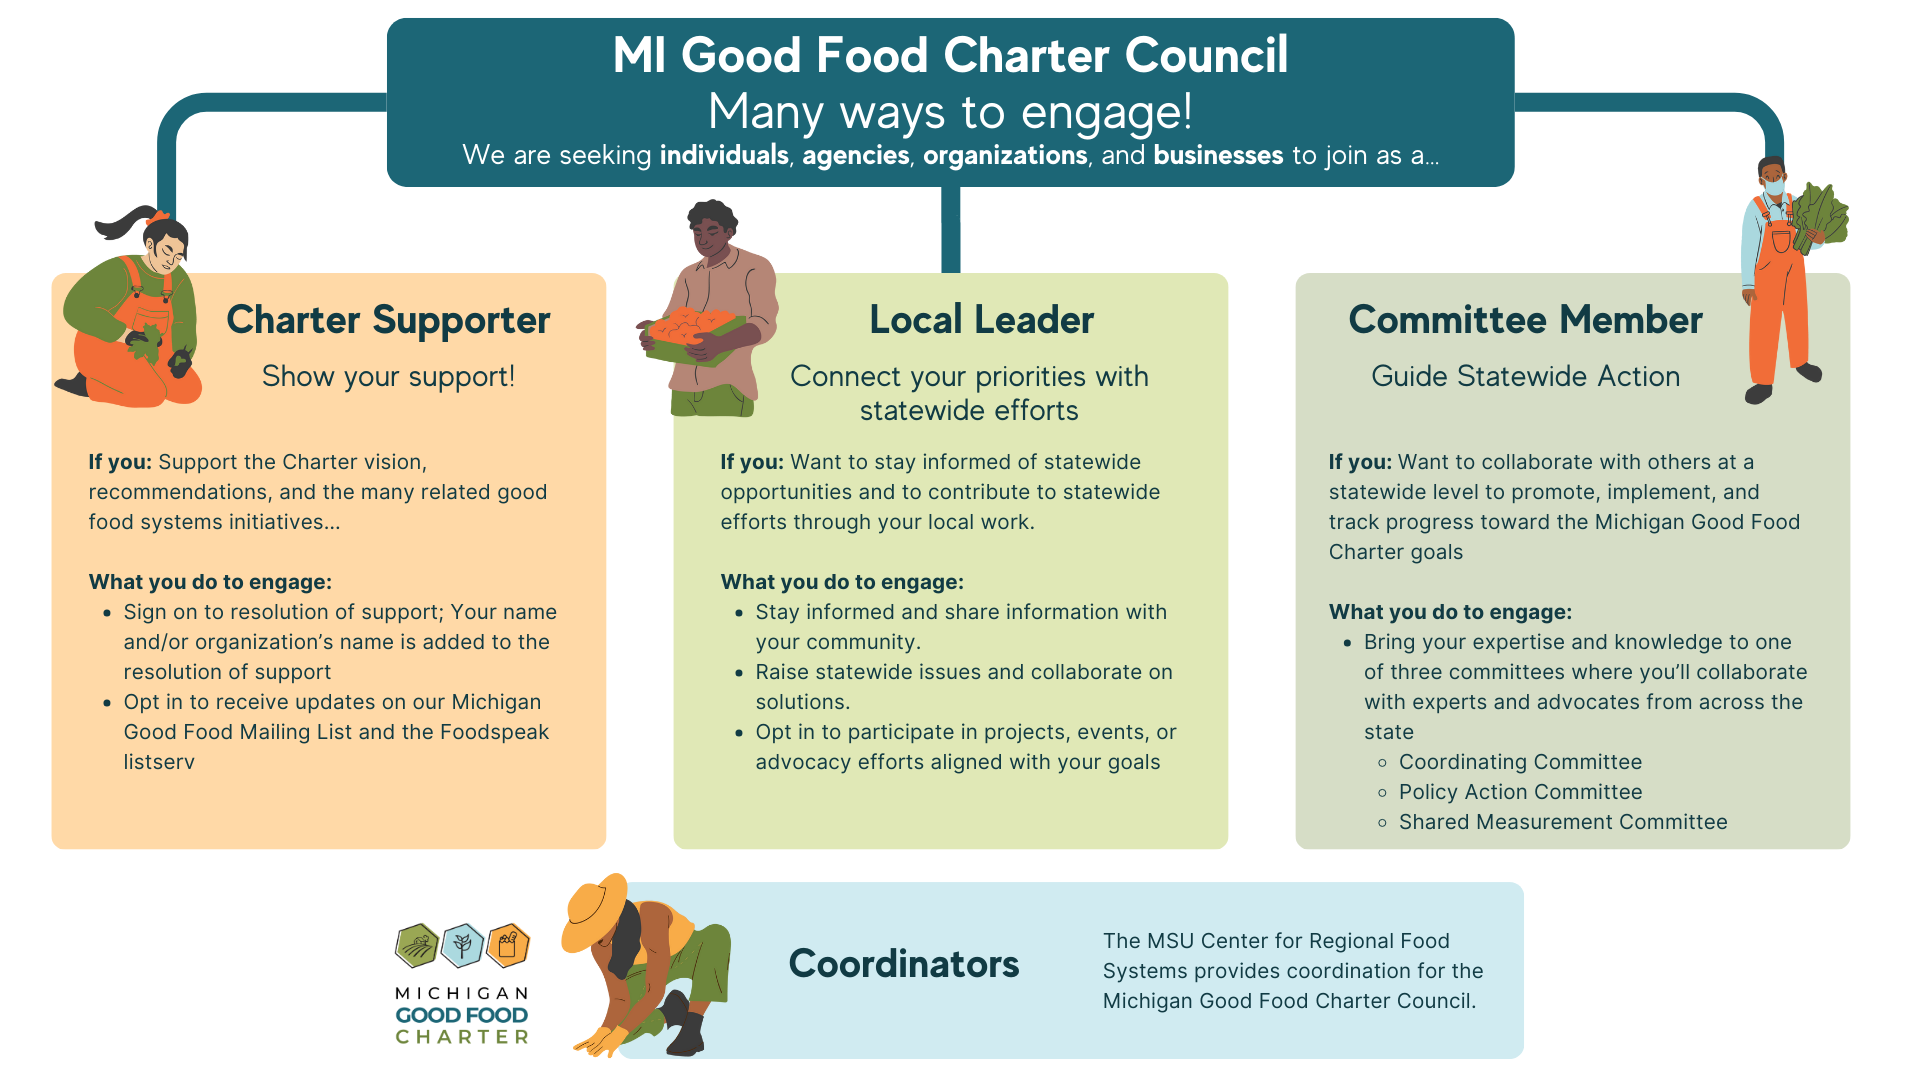 A graphic depicting the three types of engagement in the Michigan Good Food Charter Council (Supporter, Local Leader, and Council Member), the text descriptions for which are below. The image also indicates that the MSU Center for Regional Food Systems serve as coordinators for the Charter Council.